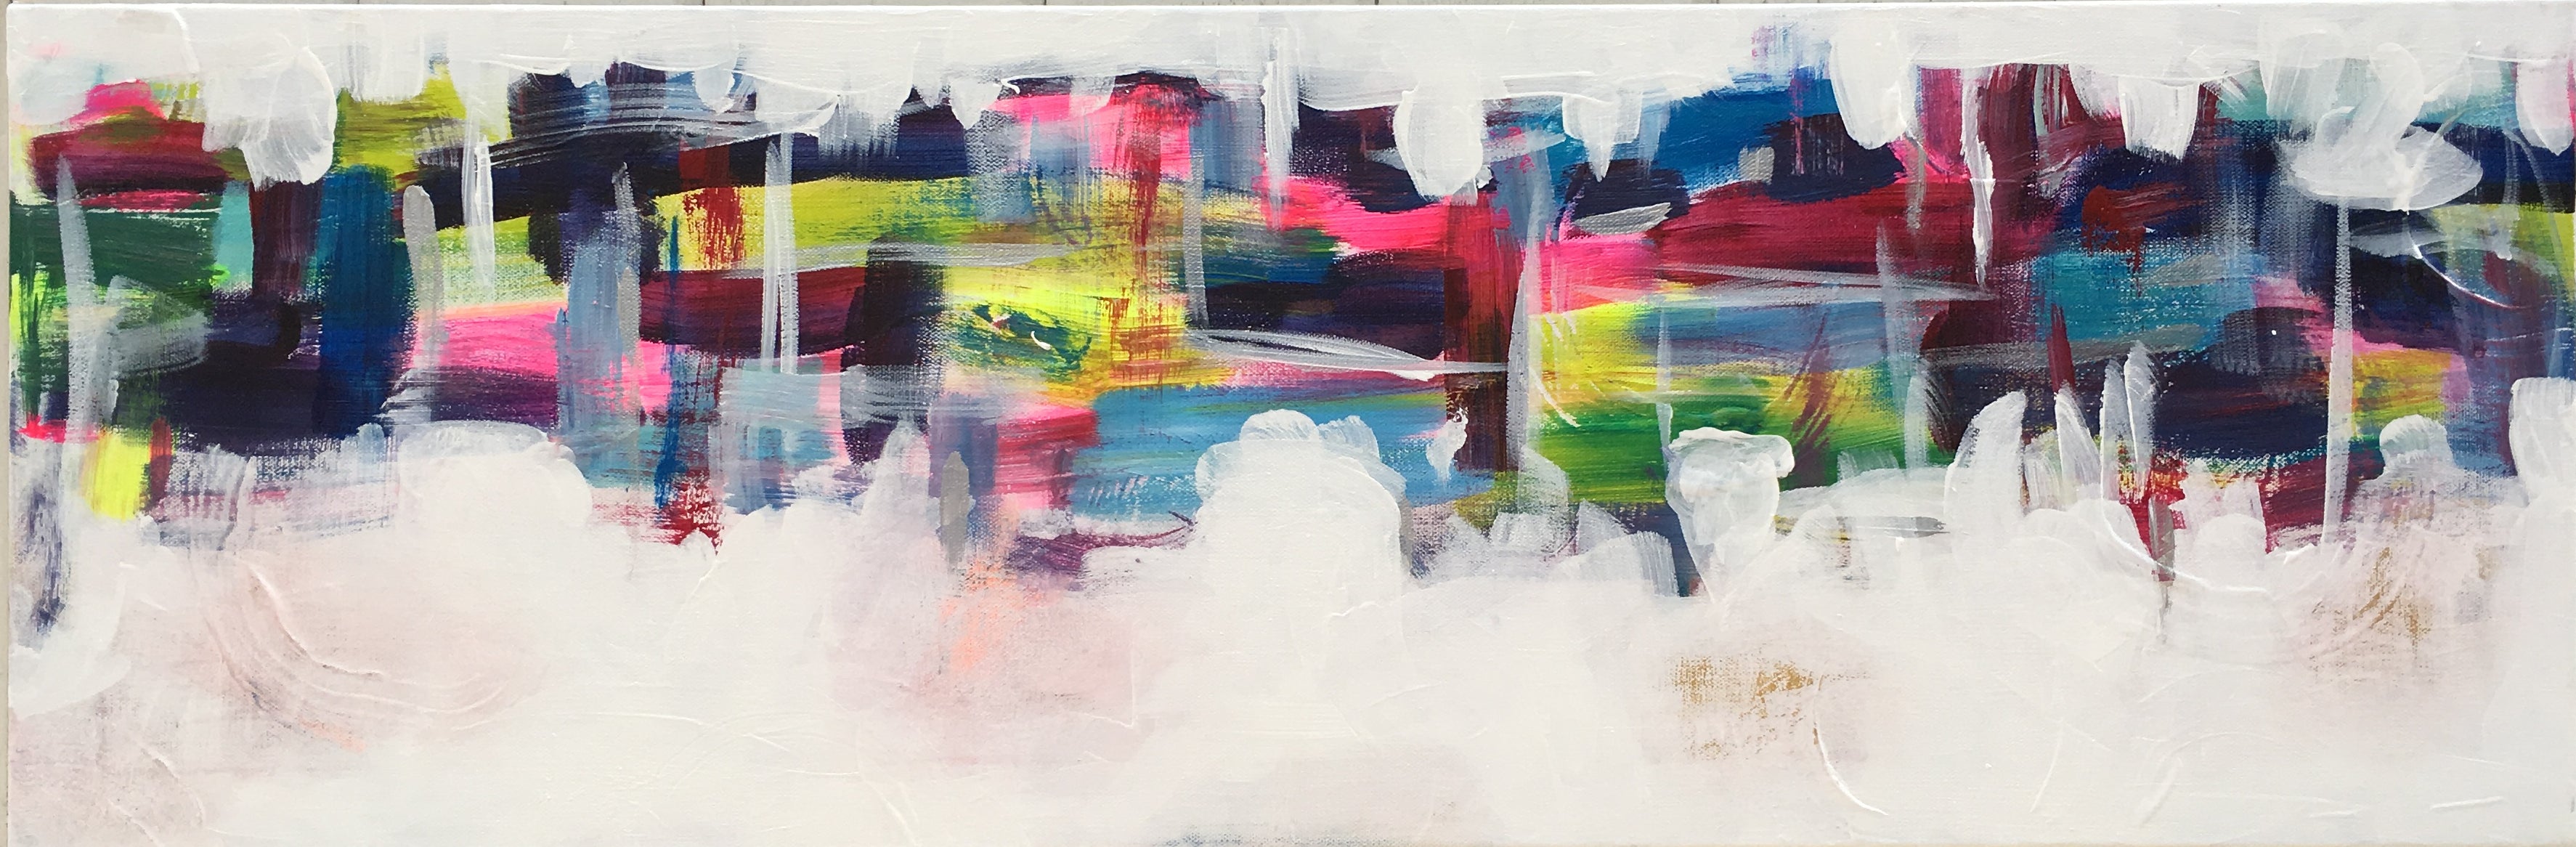 Abstract and modern acrylic painting of spring in the City by Alison Corteen, artbyalisonc.